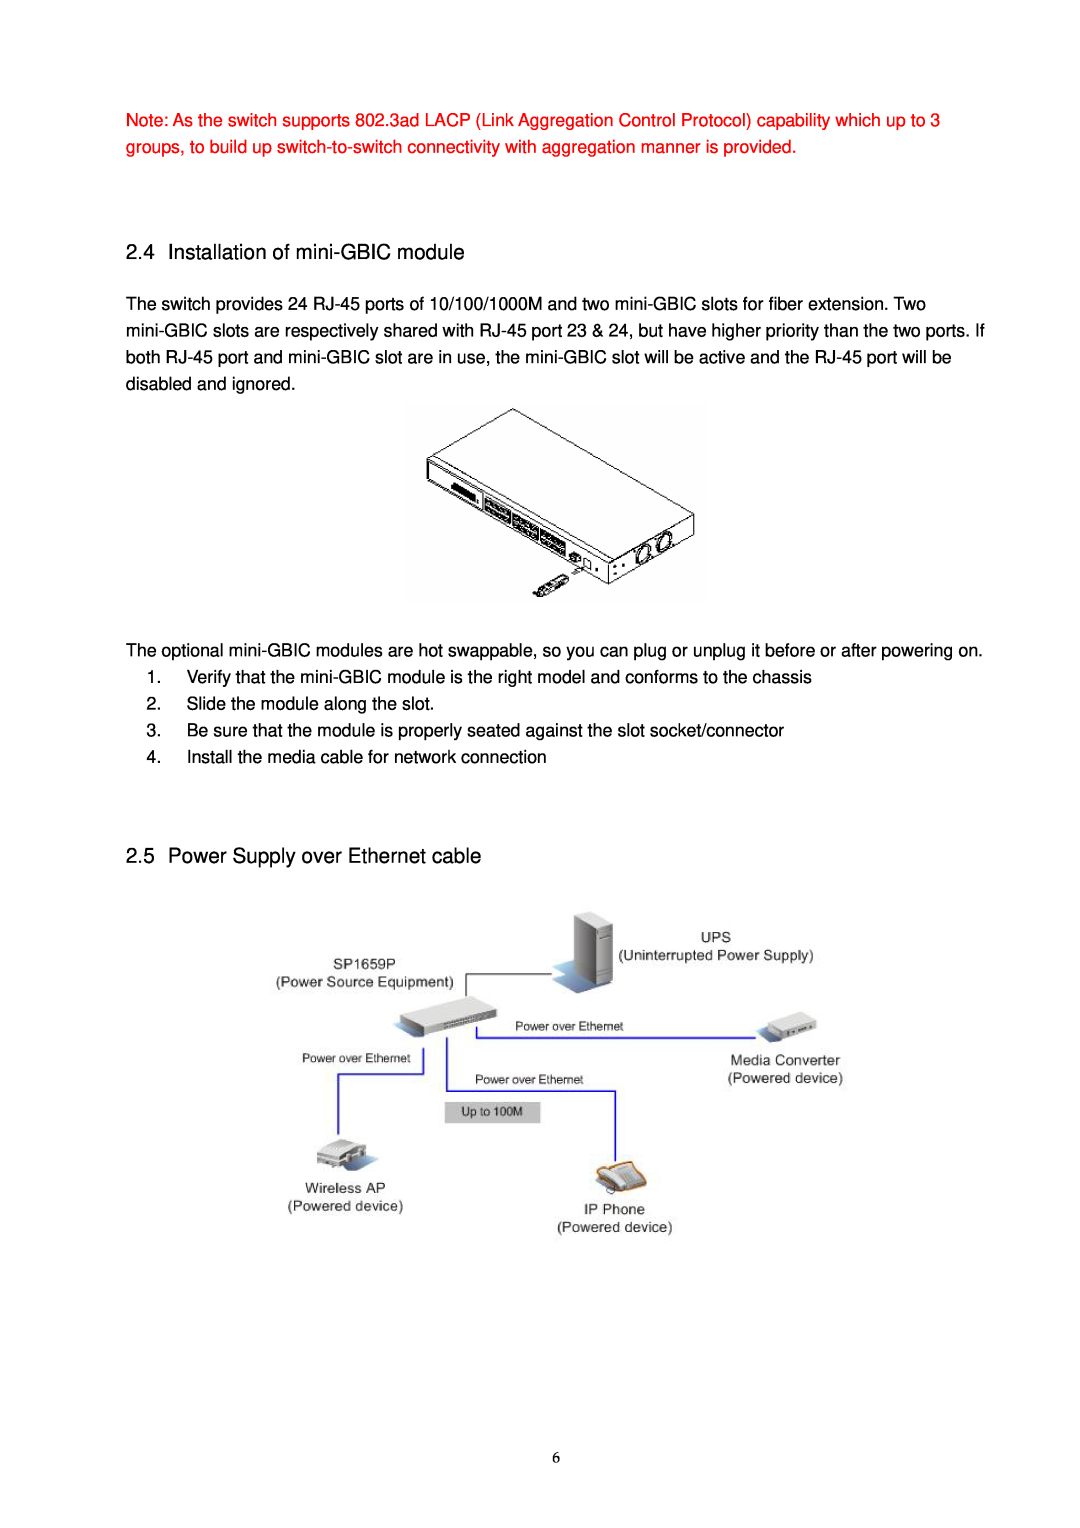 MicroNet Technology SP1659P user manual Installation of mini-GBIC module, Power Supply over Ethernet cable 